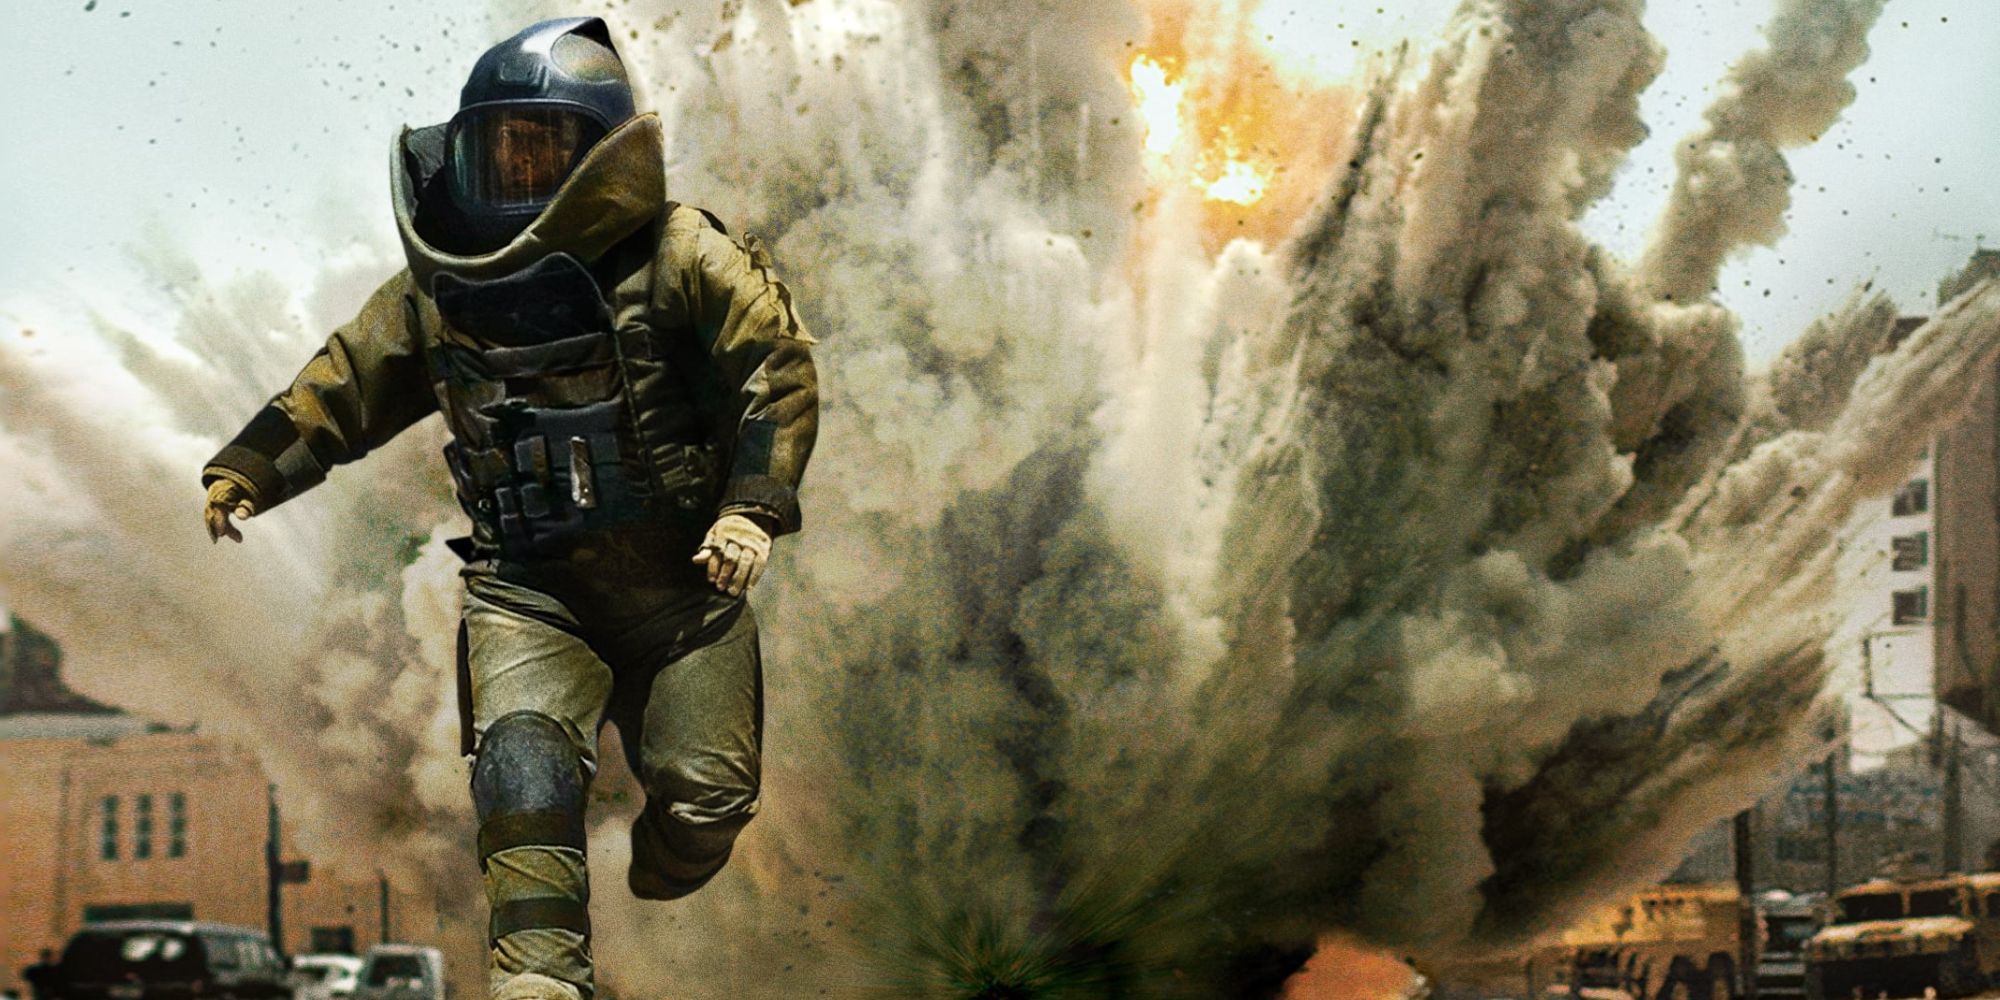 A soldier running away from an explosion in The Hurt Locker